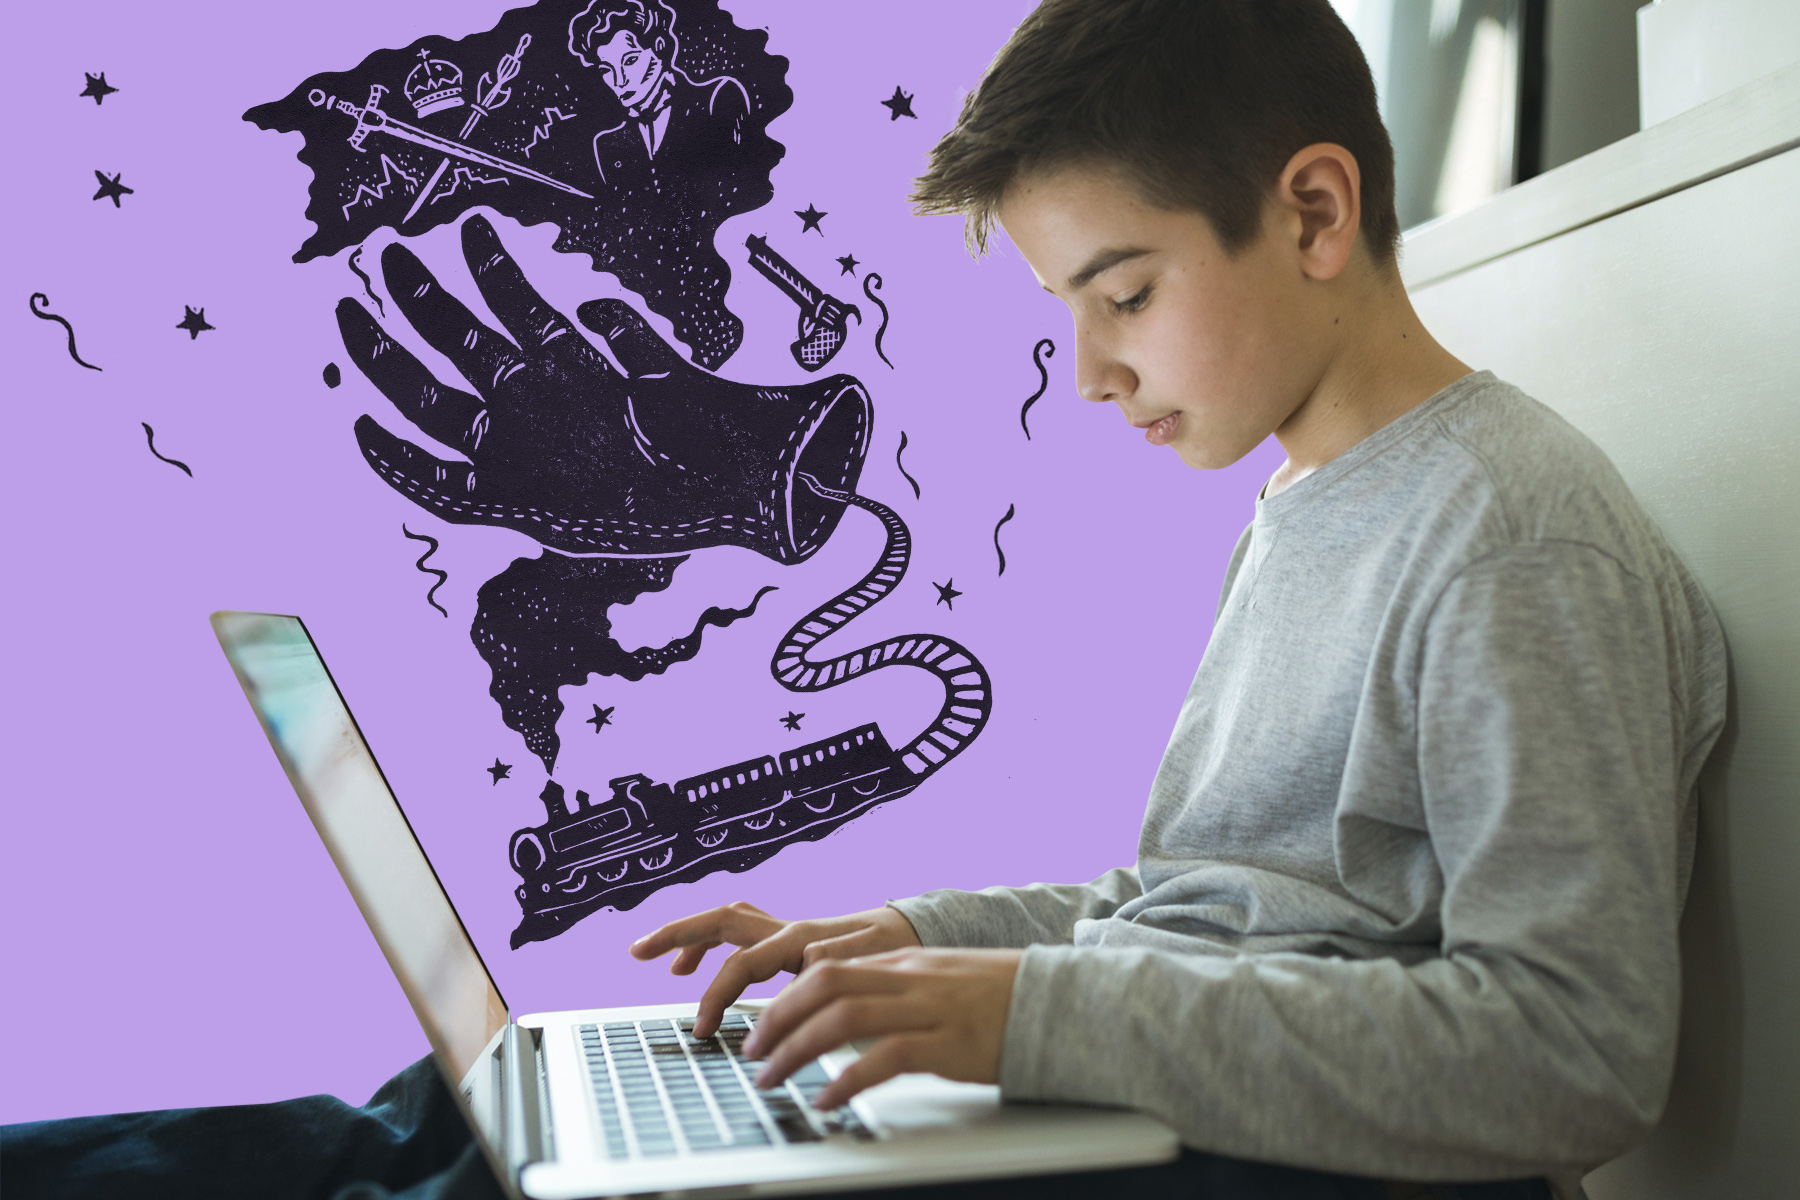 A photo of a young boy writing on a laptop against a light purple background with illustrations